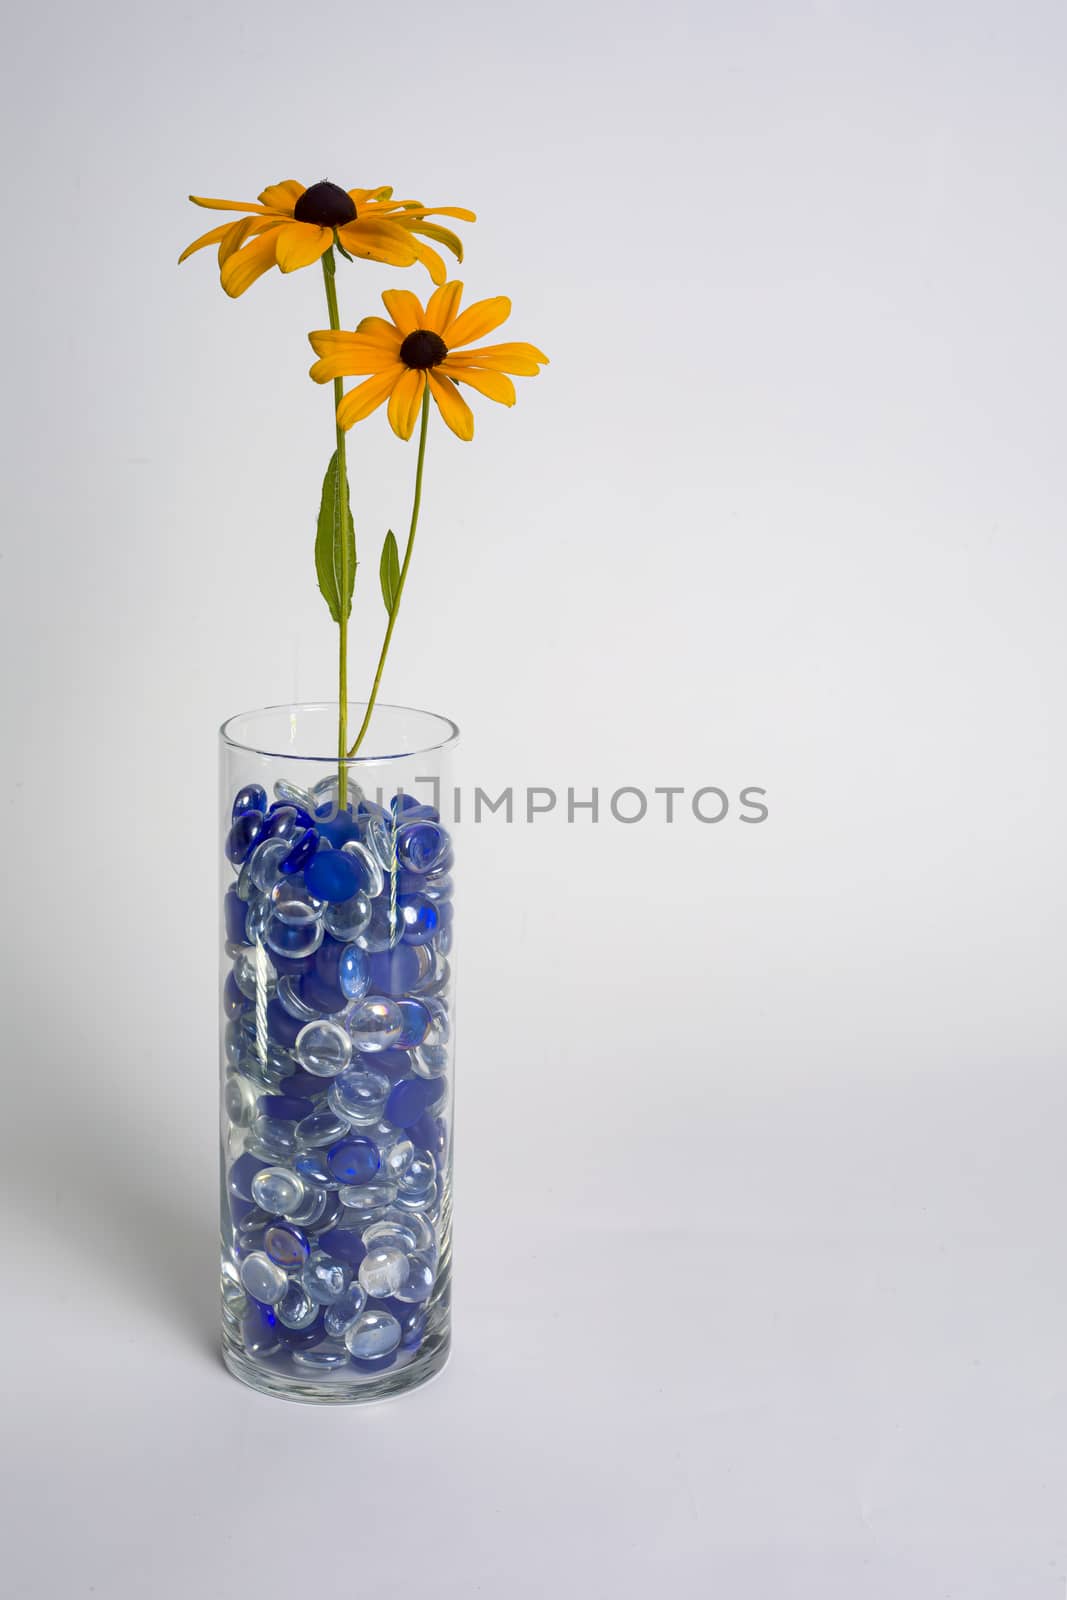 Glass Vase with Blue Beads and Black-eyed Susans by CharlieFloyd